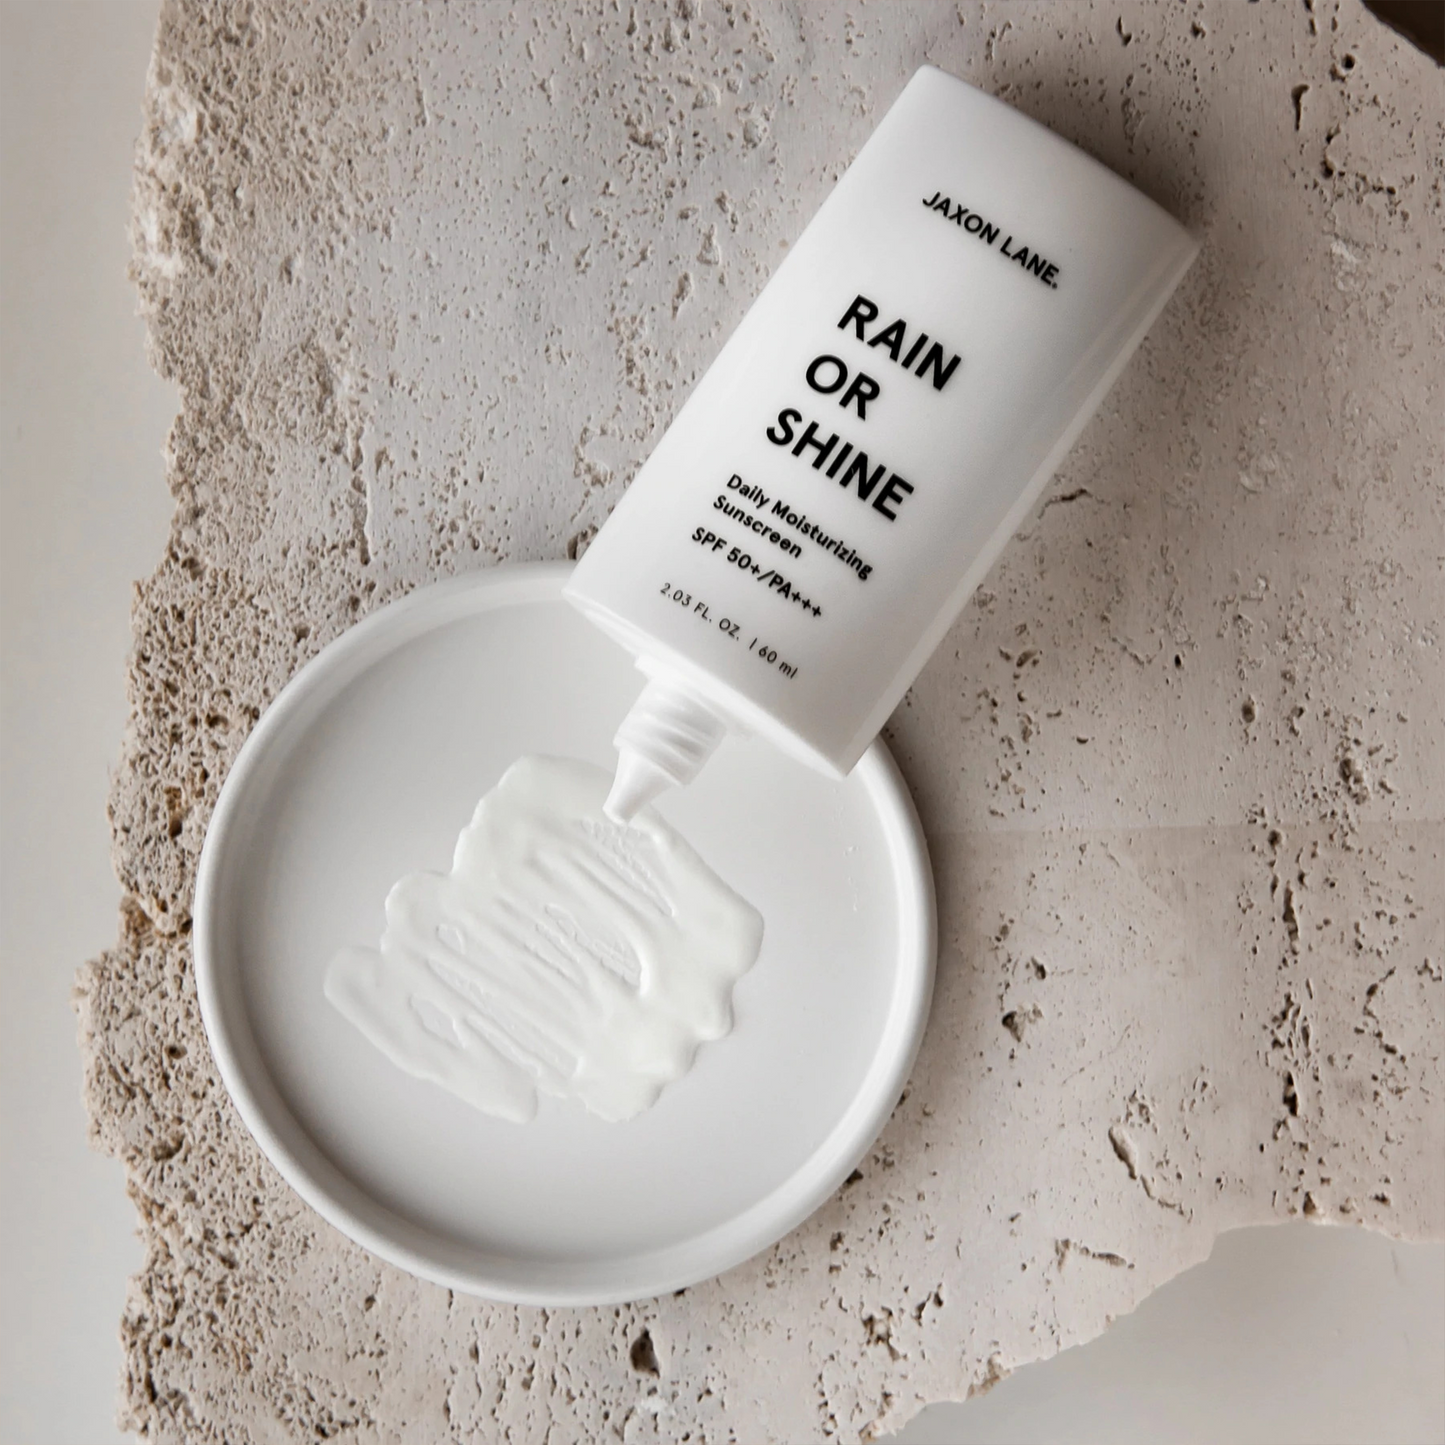 Jaxon Lane Rain Or Shine Daily Moisturizing Sunscreen: No white cast, oil-free, hassle free sunscreen.  2x award winning sunscreen that goes on smooth and dries clear, so you can feel safe and look great.